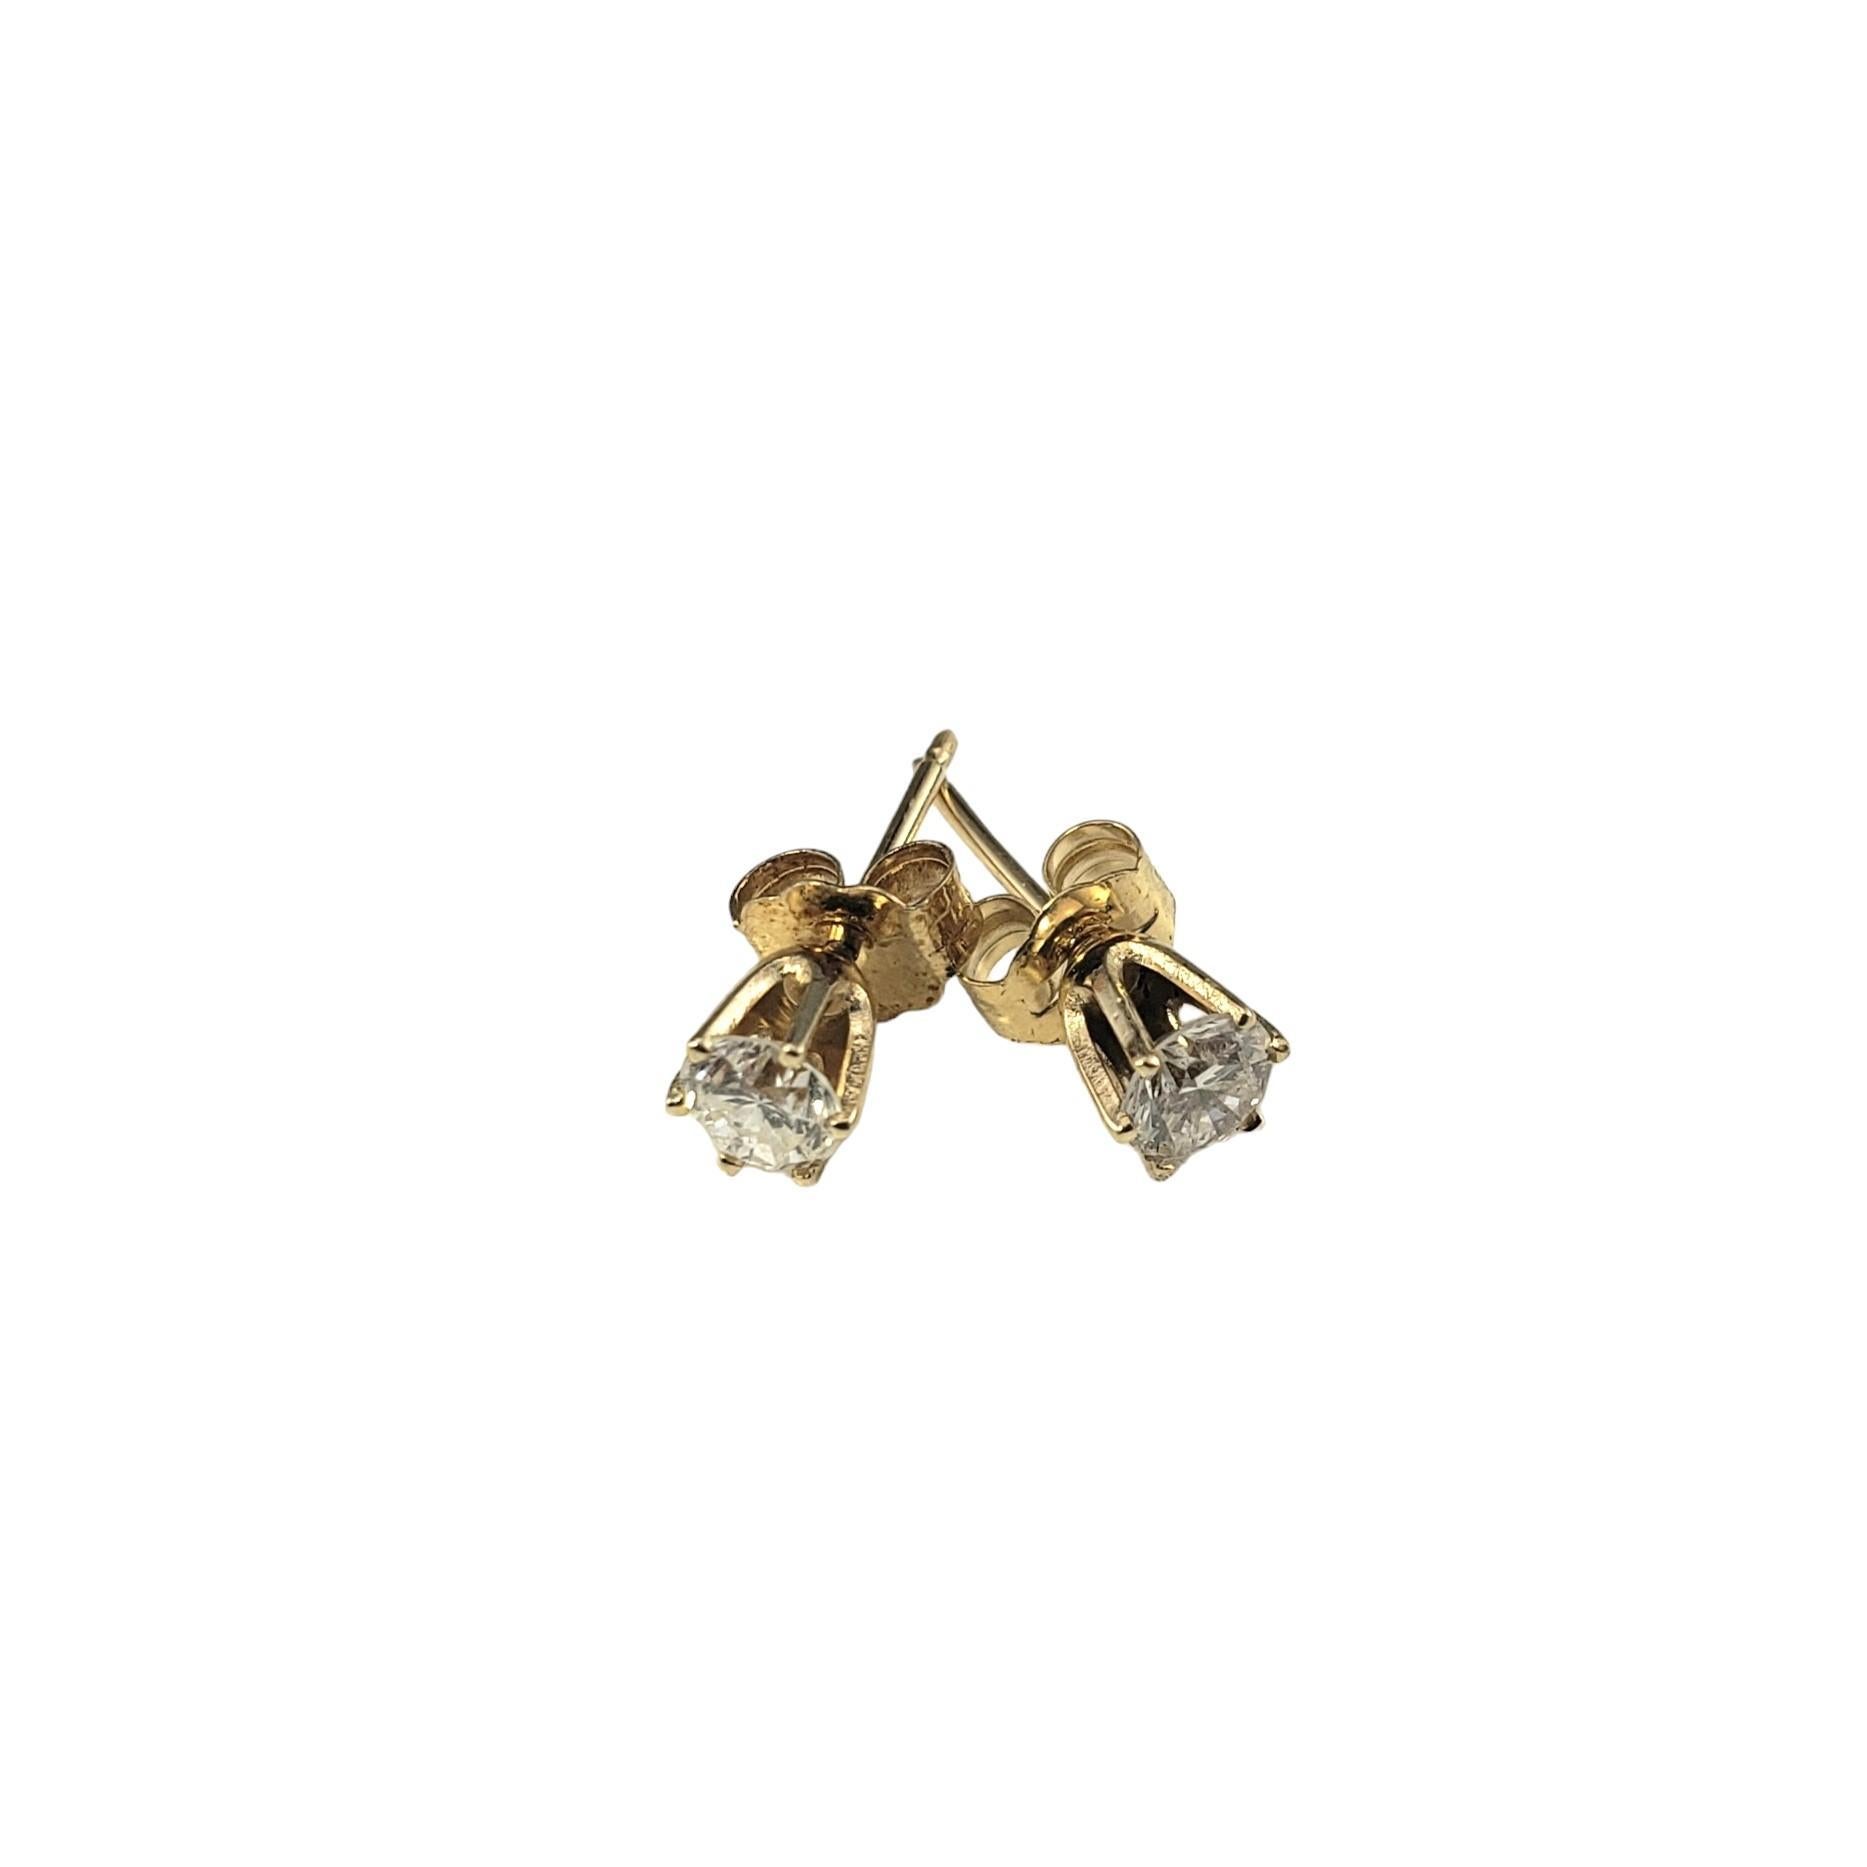 Vintage 14K Yellow Gold Diamond Stud Earrings-

These sparkling earrings each feature one round brilliant cut diamond set in classic 14K yellow gold. Push back closures.

Approximate total diamond weight: .43 ct.

Diamond color: H-I

Diamond